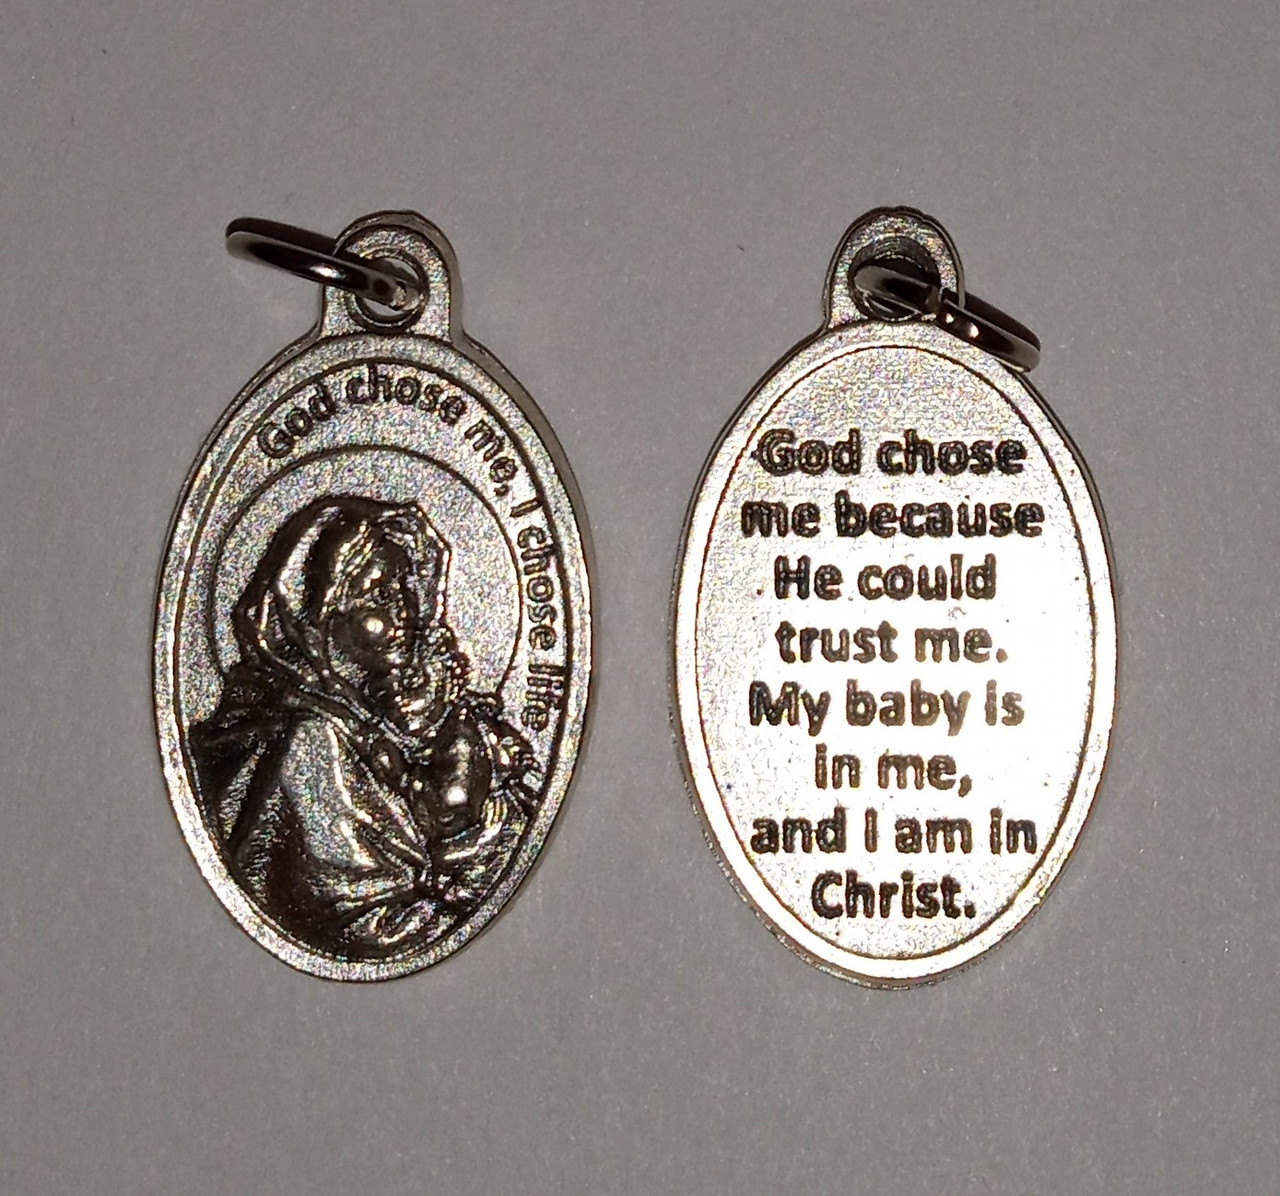 Madonna and Child Pro Life Medal